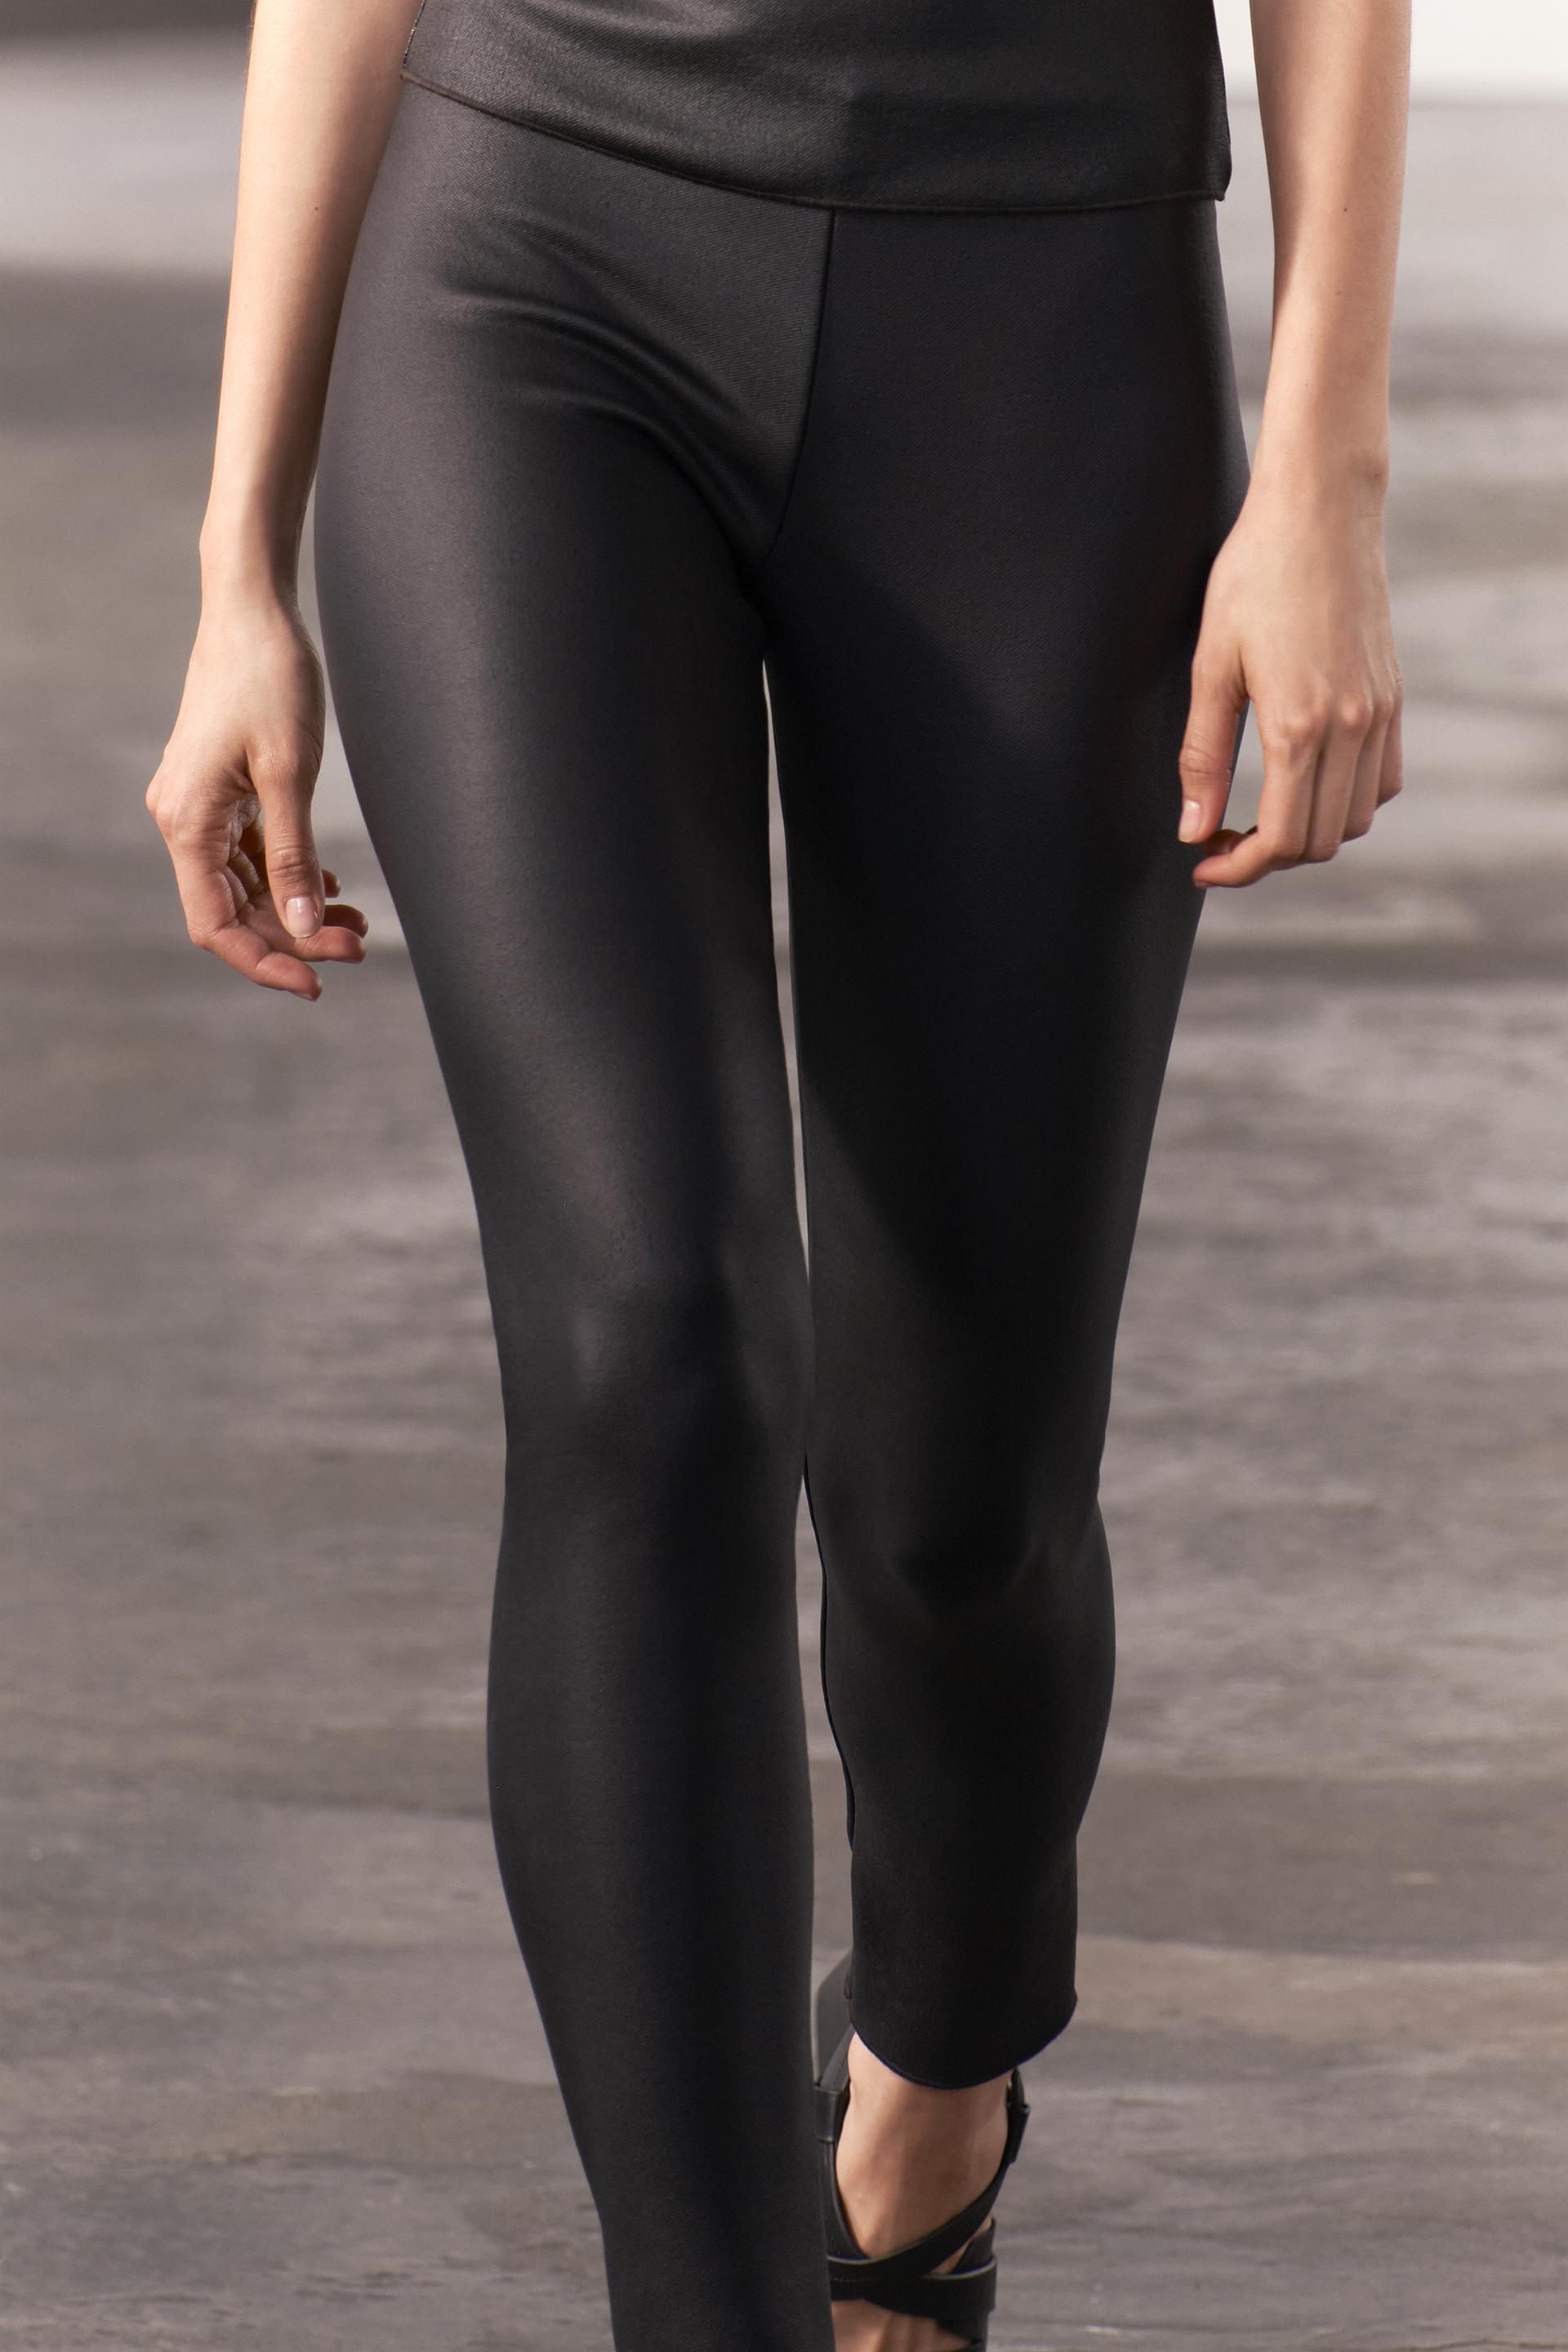 ZARA on X: Technical top and power stretch leggings